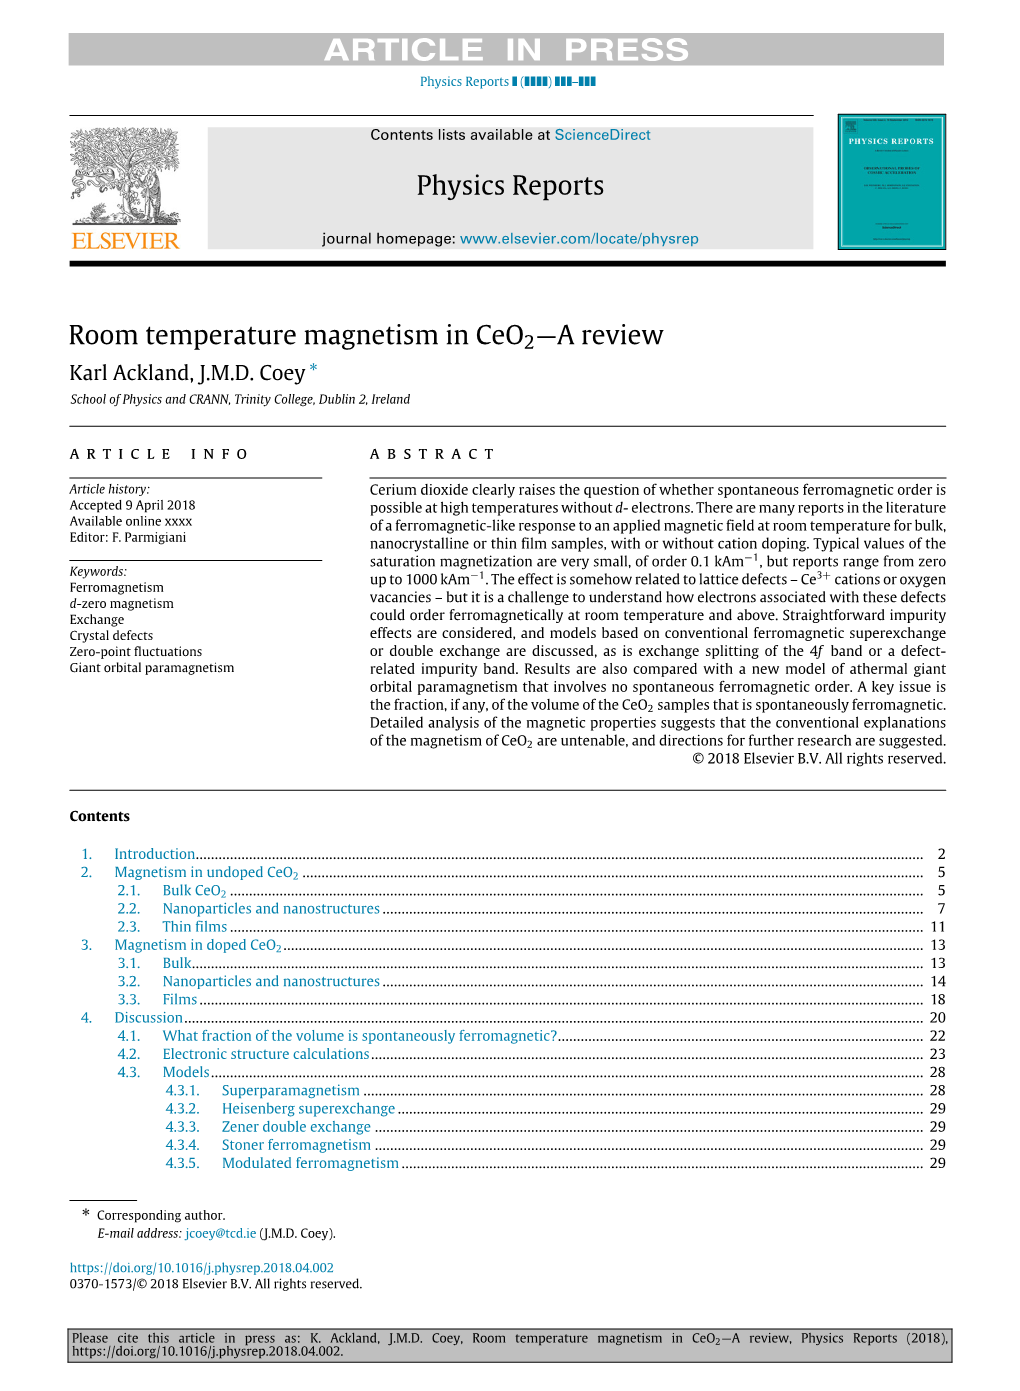 Physics Reports Room Temperature Magnetism in Ceo2—A Review